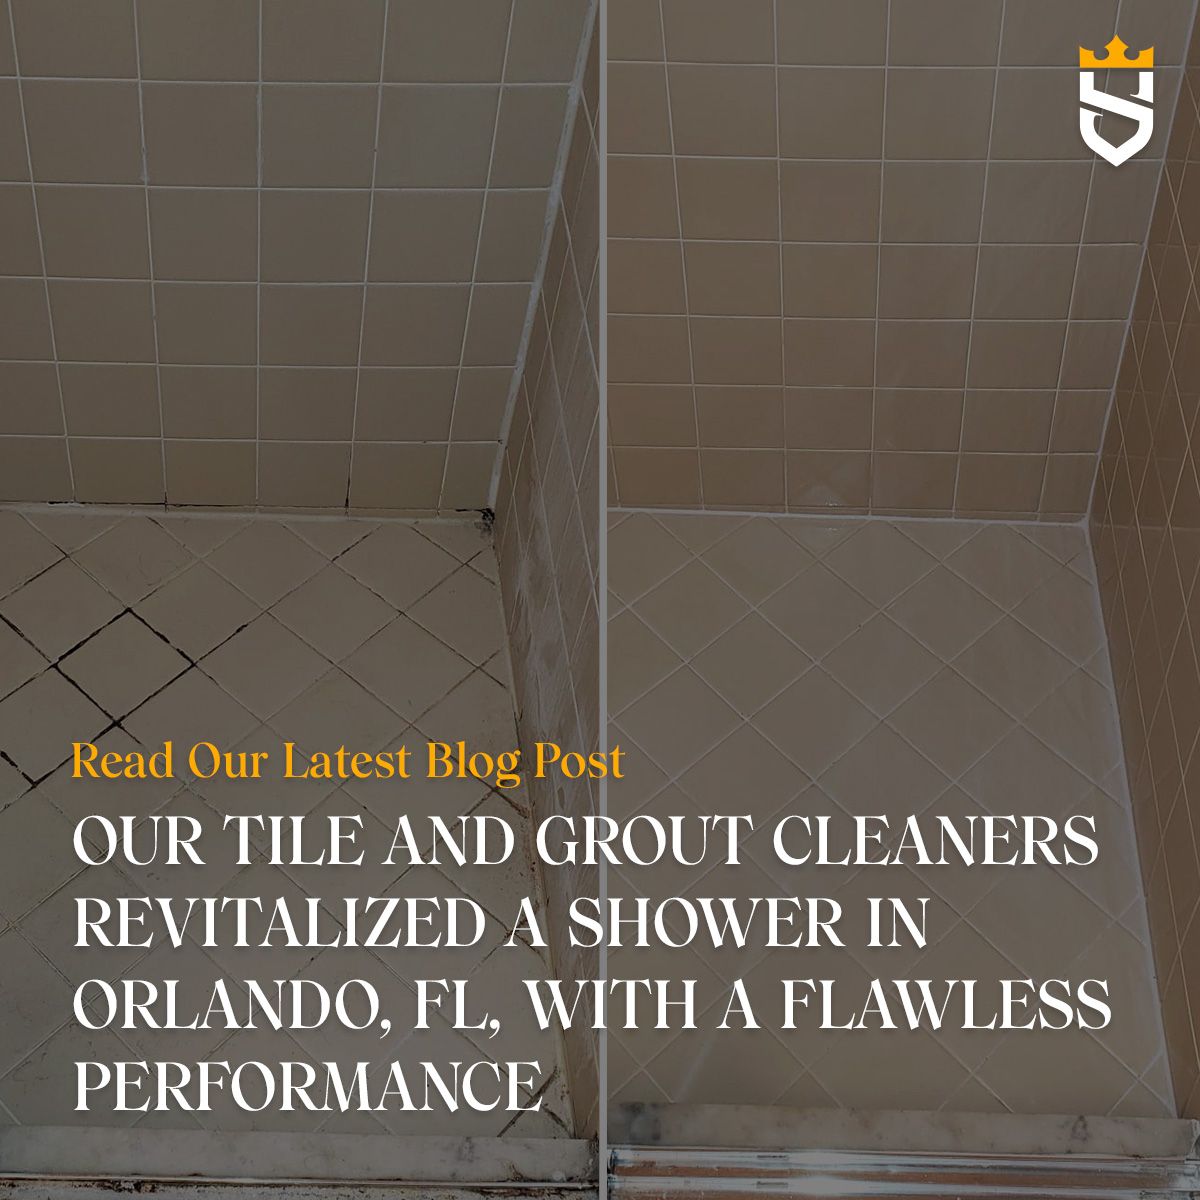 Our Tile and Grout Cleaners Revitalized a Shower in Orlando, FL, With a Flawless Performance